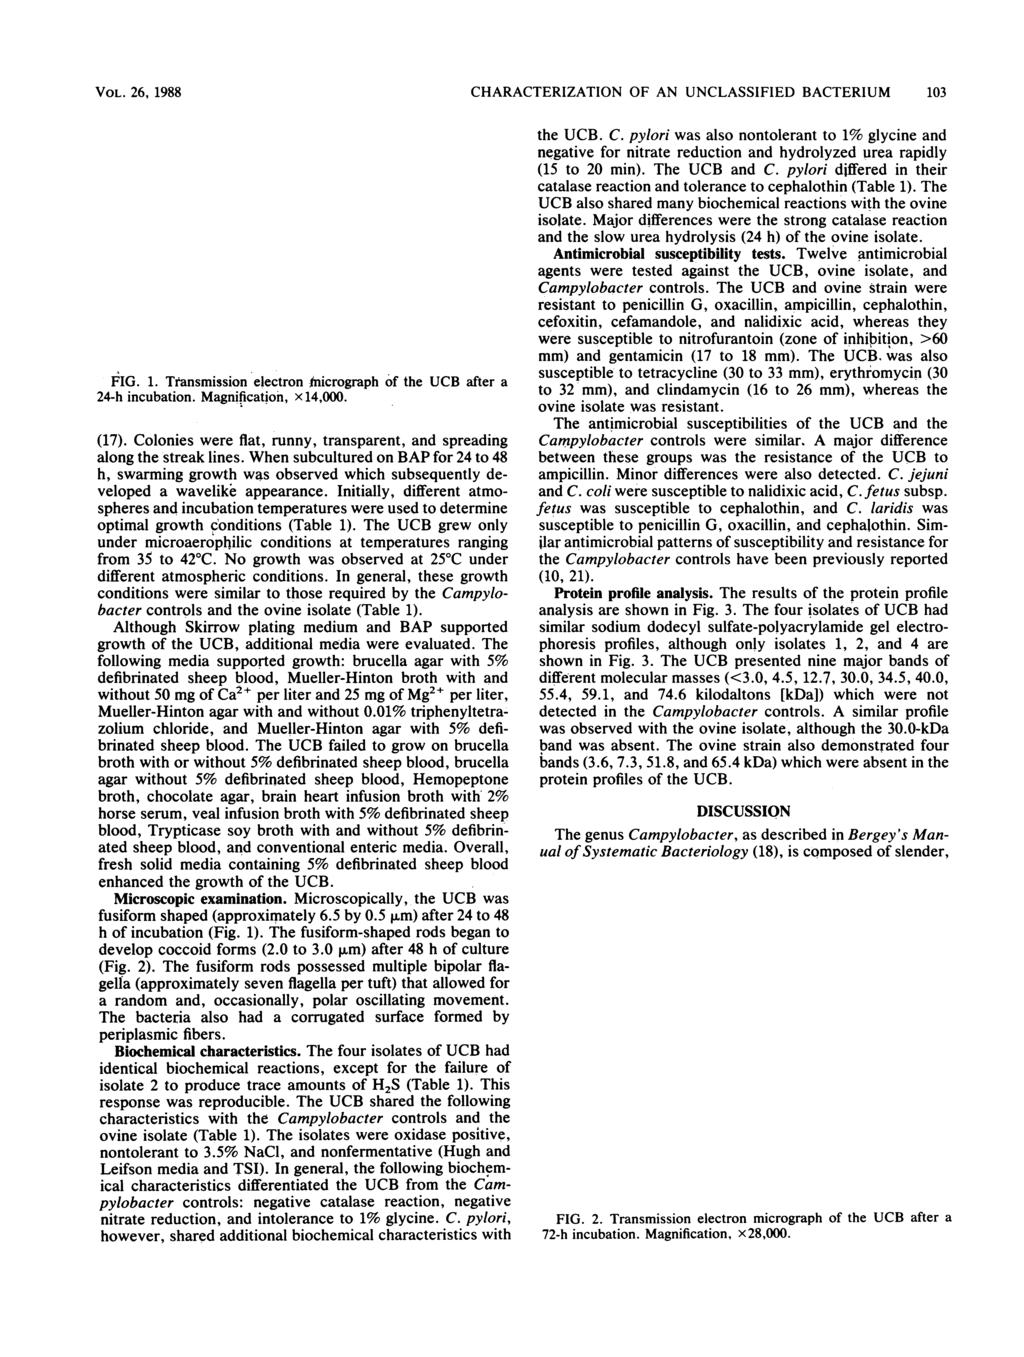 VOL. 26, 1988 CHARACTERIZATION OF AN UNCLASSIFIED BACTERIUM 103 FIG. 1. Transmission electron -nicrograph of the UCB after a 24-h incubation. Magnification, x 14,000. (17).